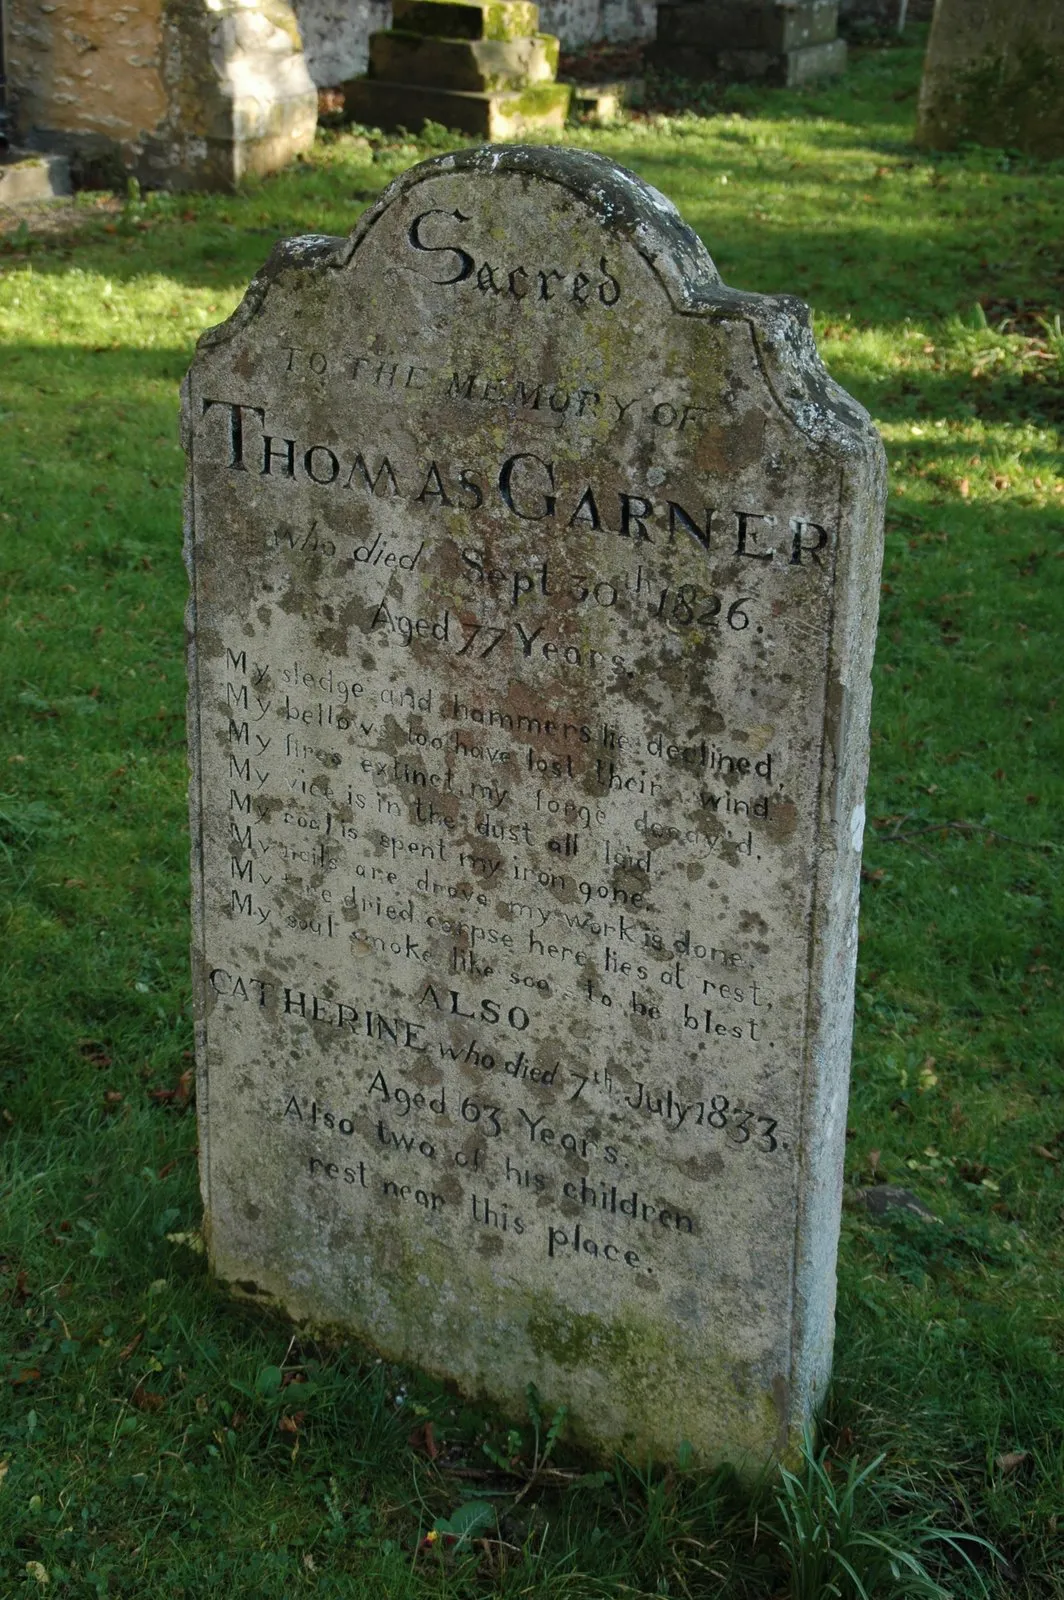 Photo showing: A gravestone for a village blacksmith with a suitably poetic epitaph. Located in the churchyard of St Mary's, Houghton, Cambridgeshire